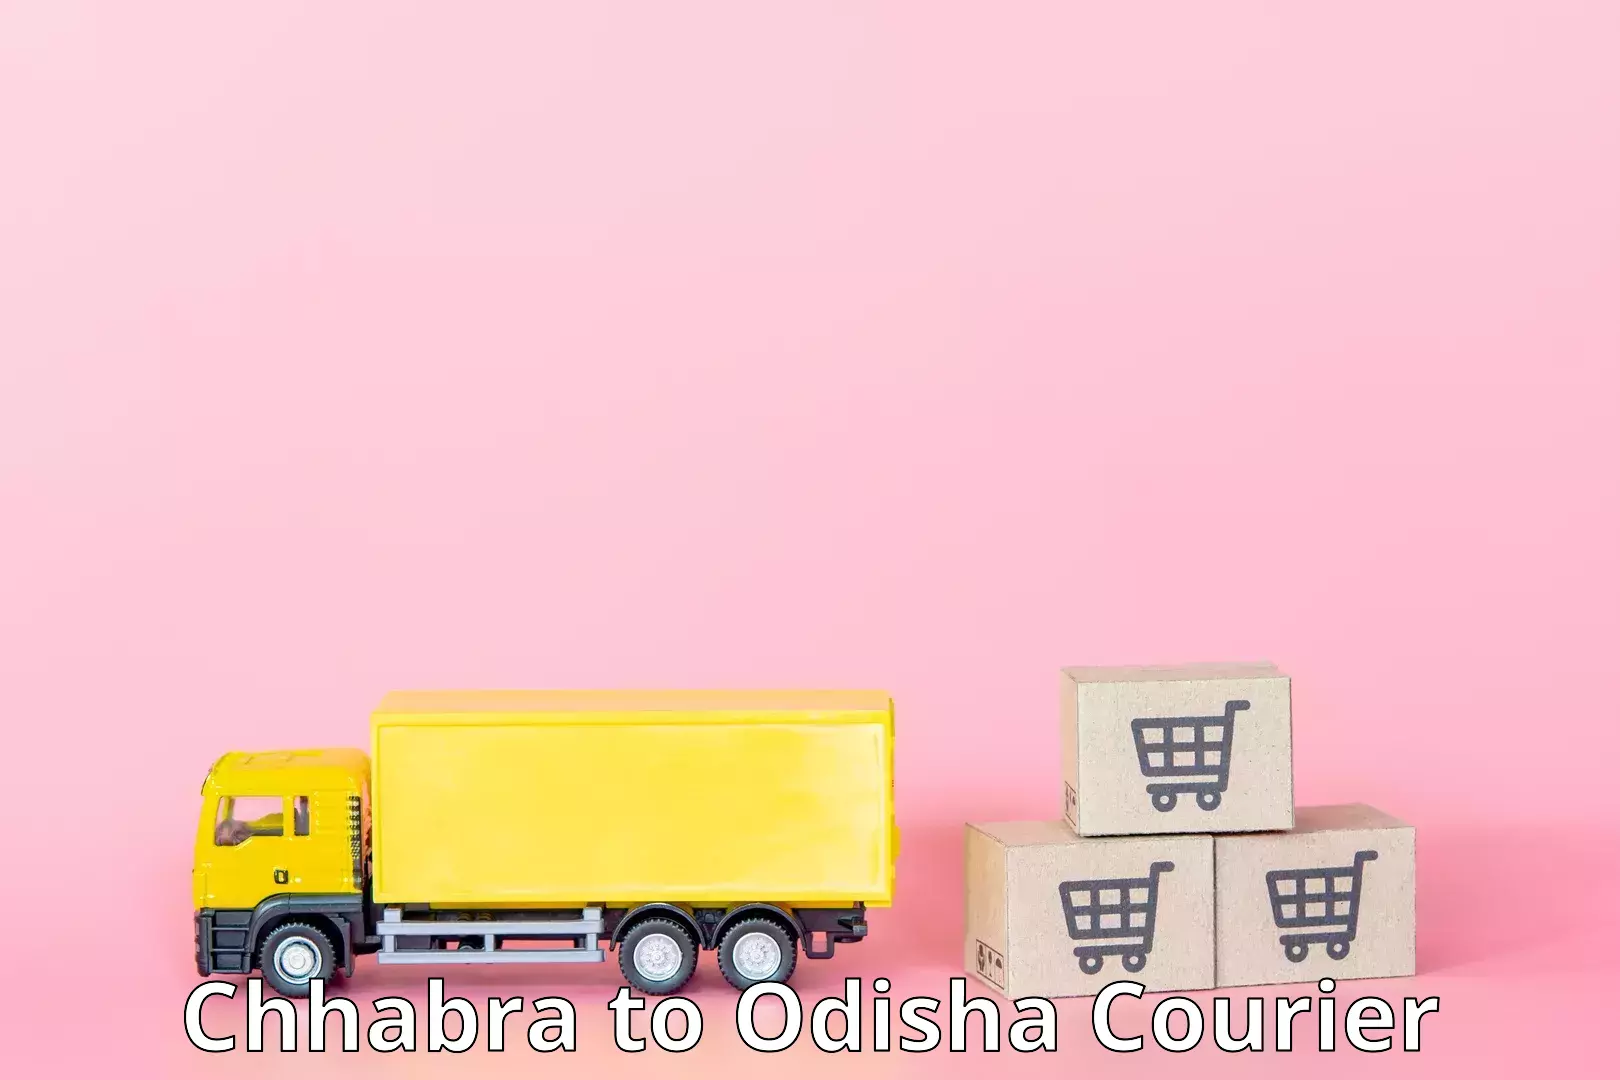 Efficient parcel service Chhabra to Baliapal